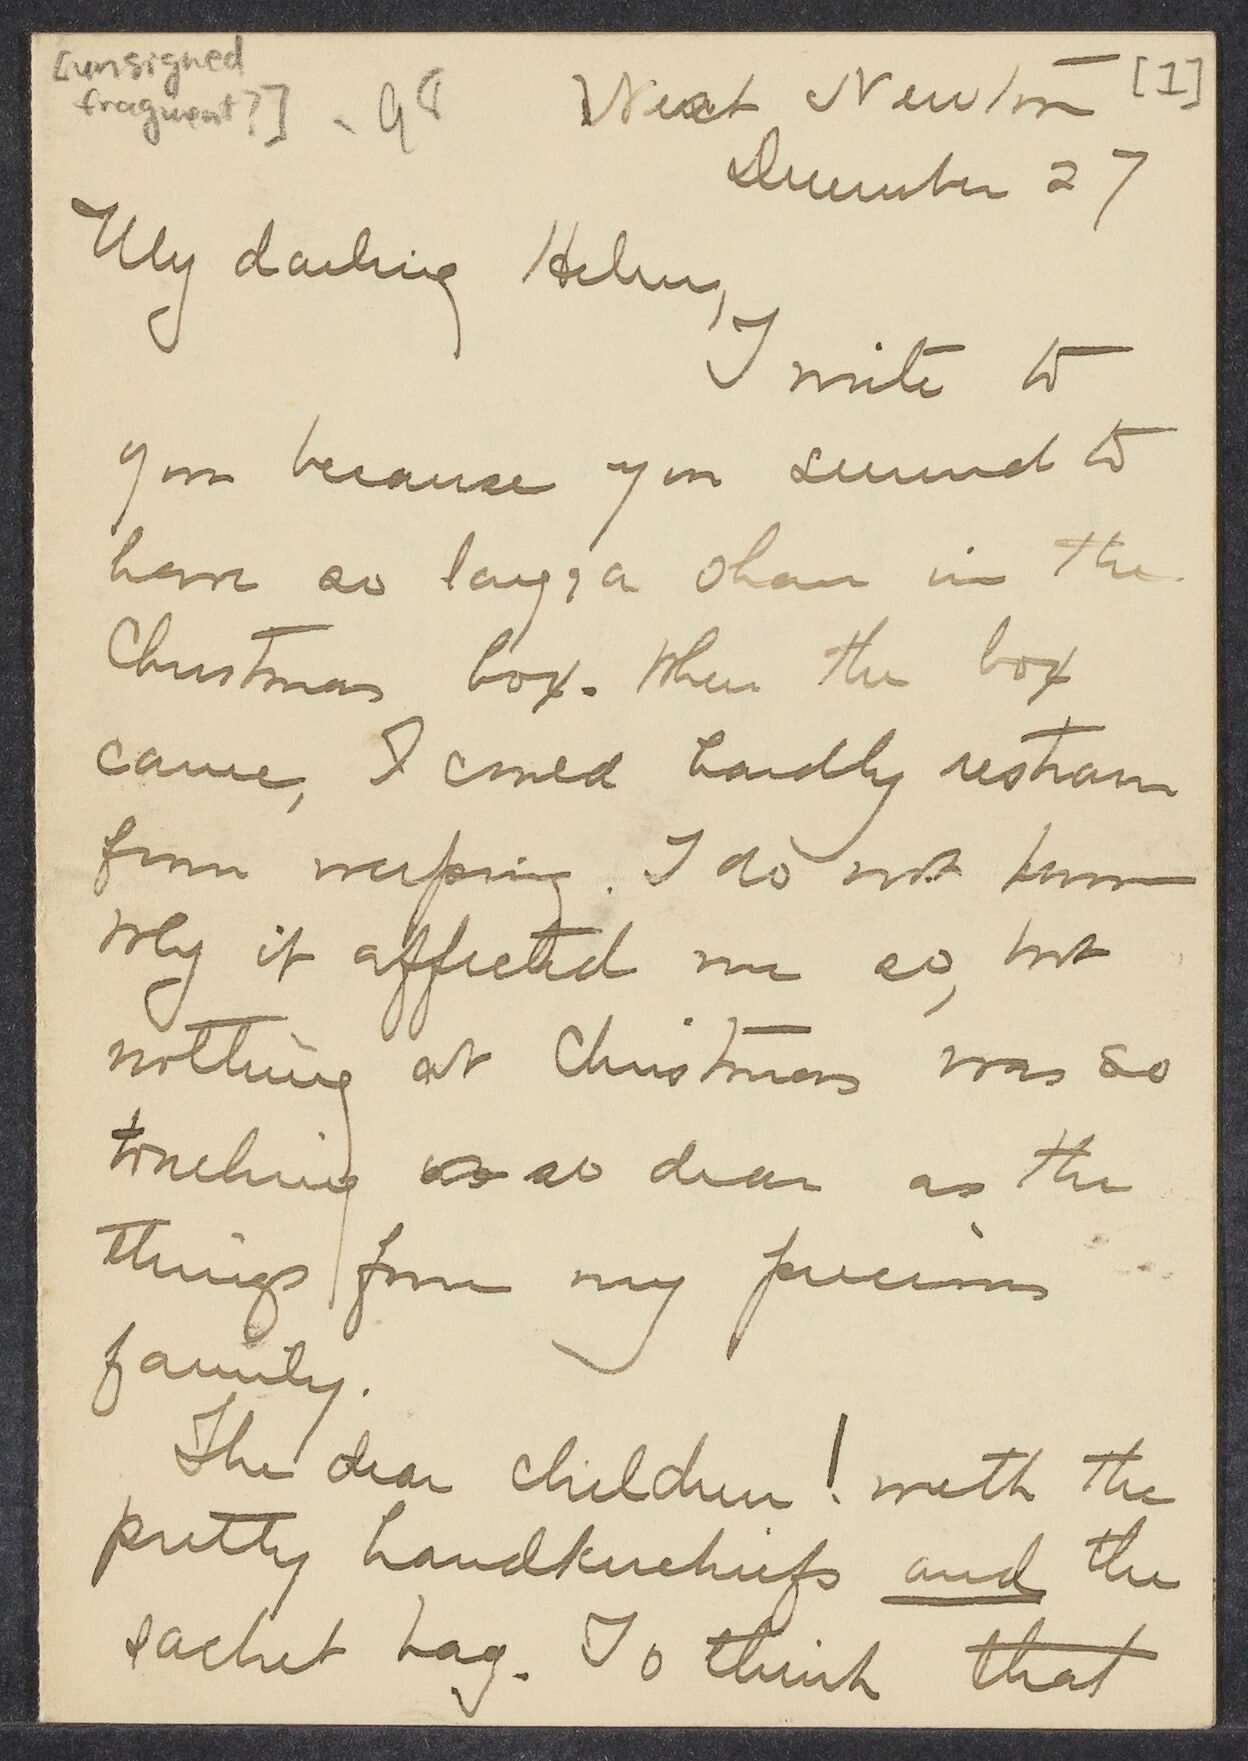 Letters from Cornelia James Cannon to her parents and siblings, 1898